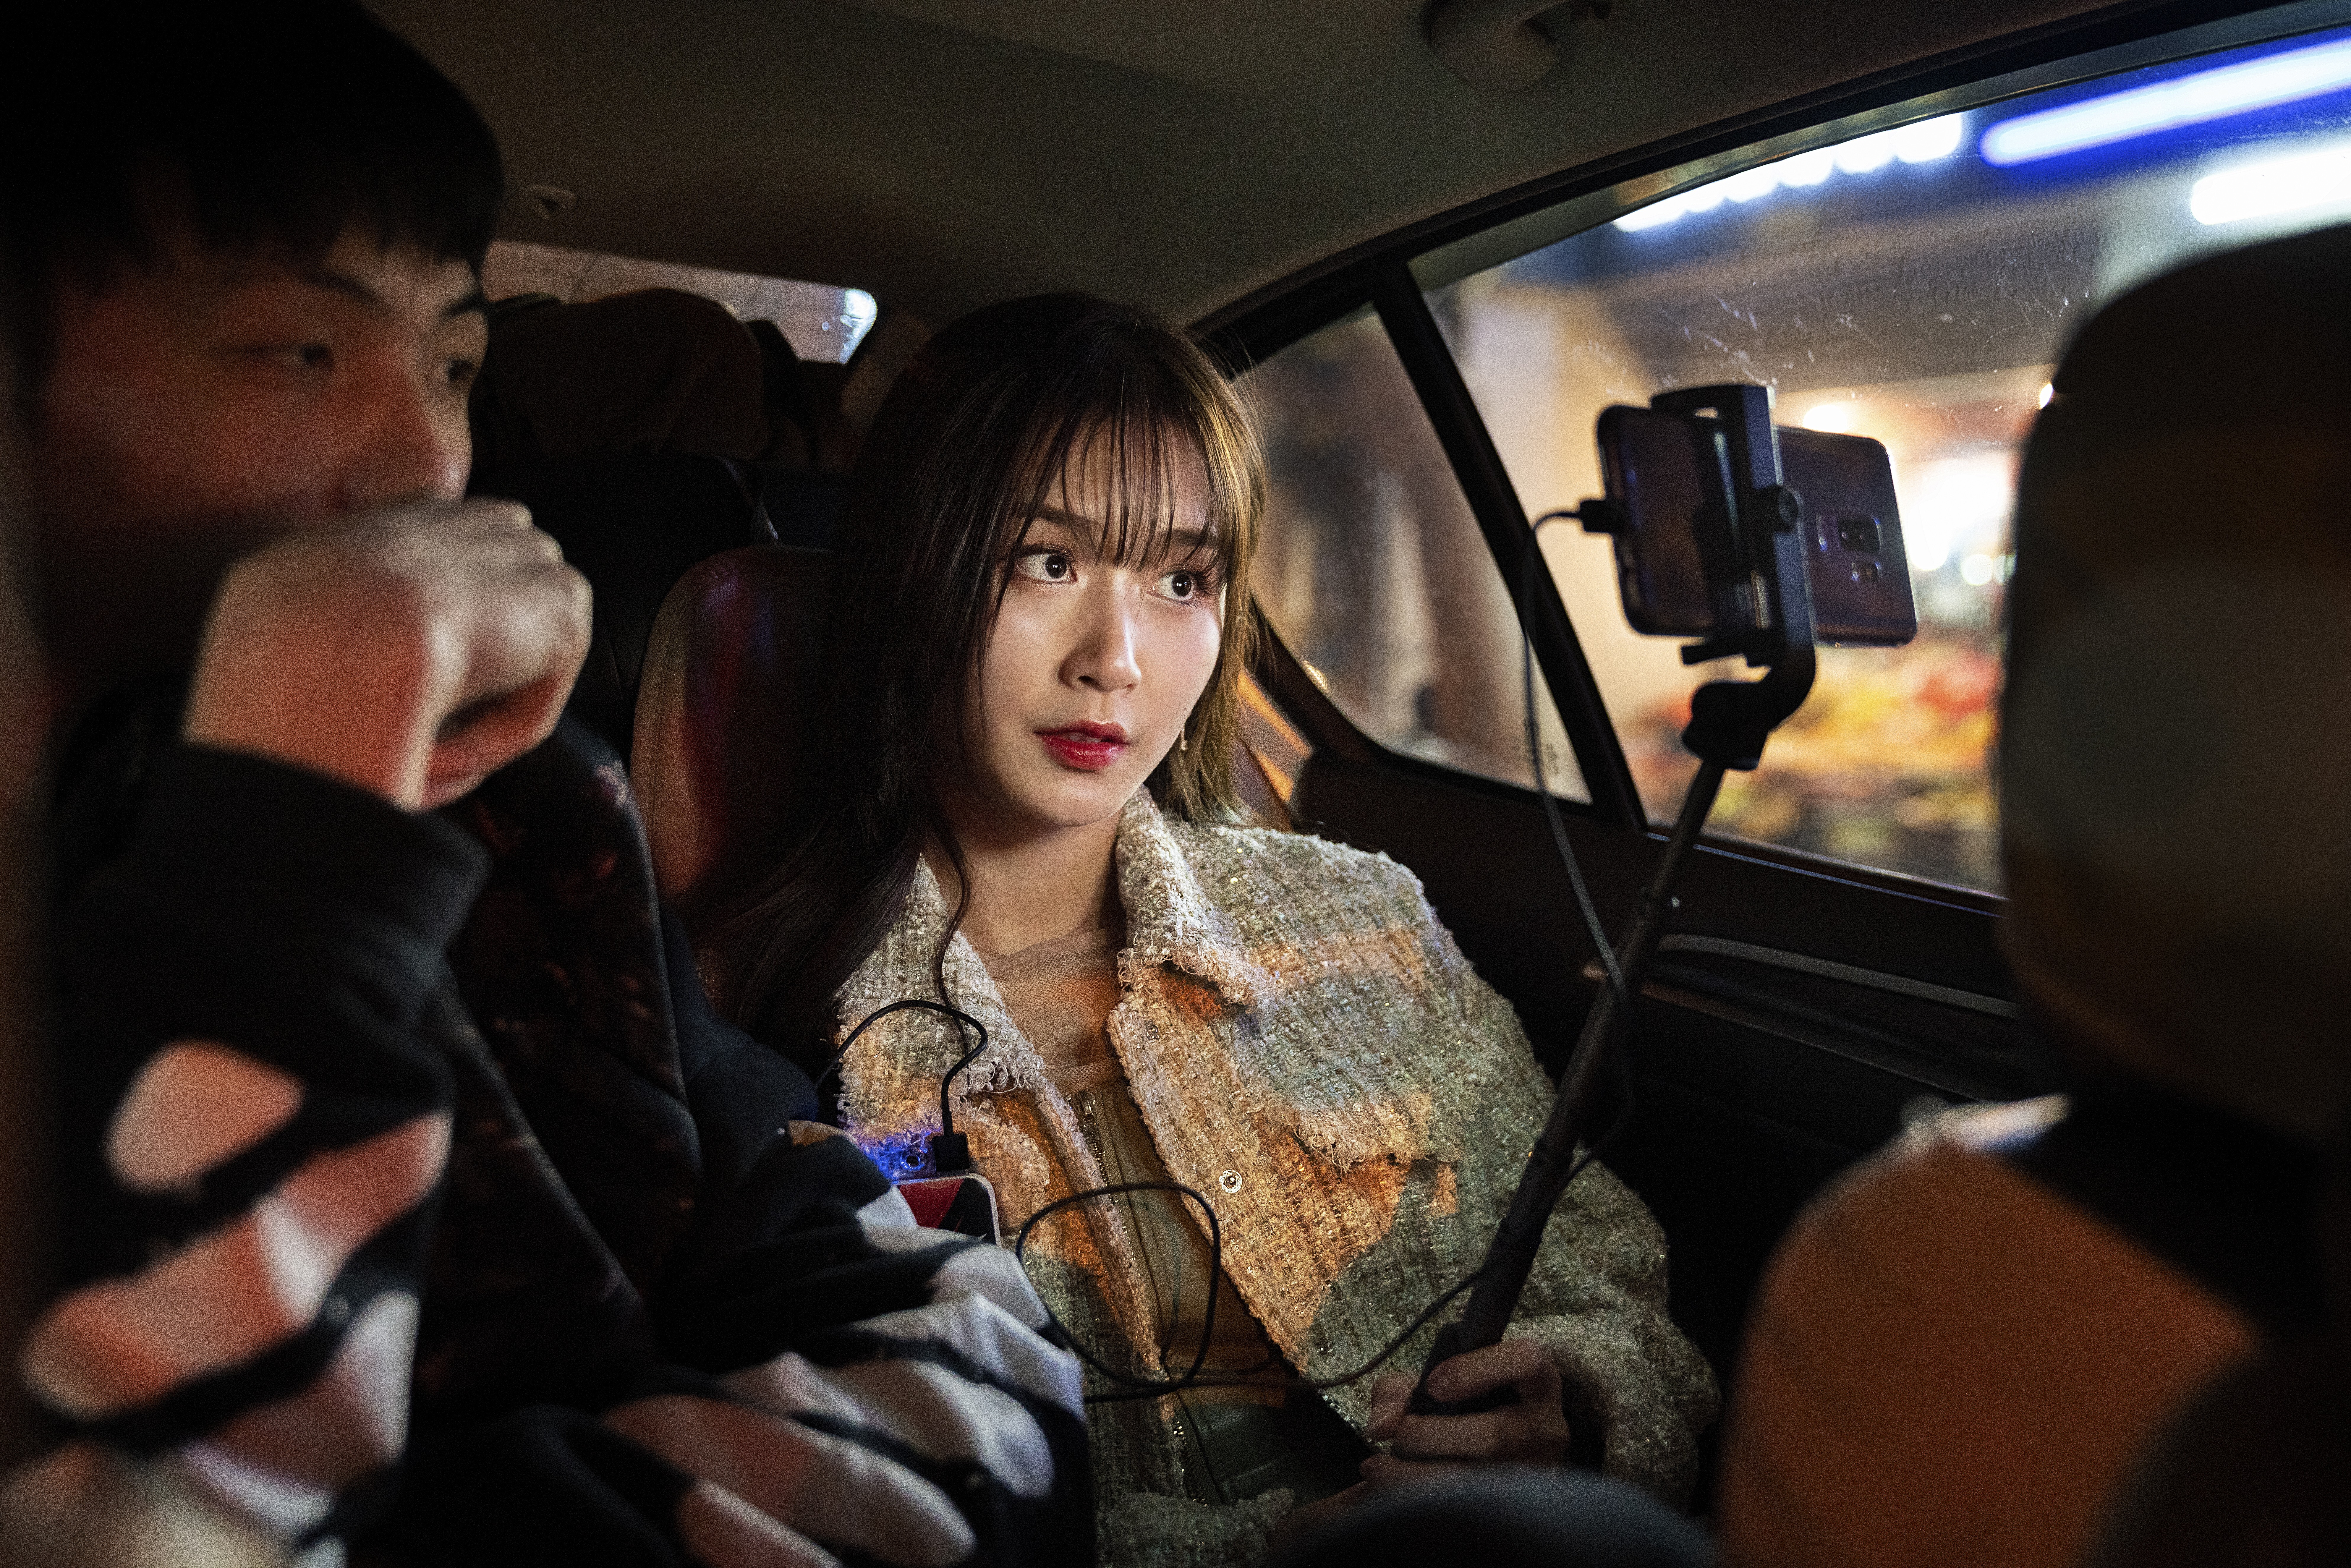 Nai Nai live-streams while sitting in a taxi with a fan after her birthday party in Shanghai, China, last March. Photo: Justin Jin